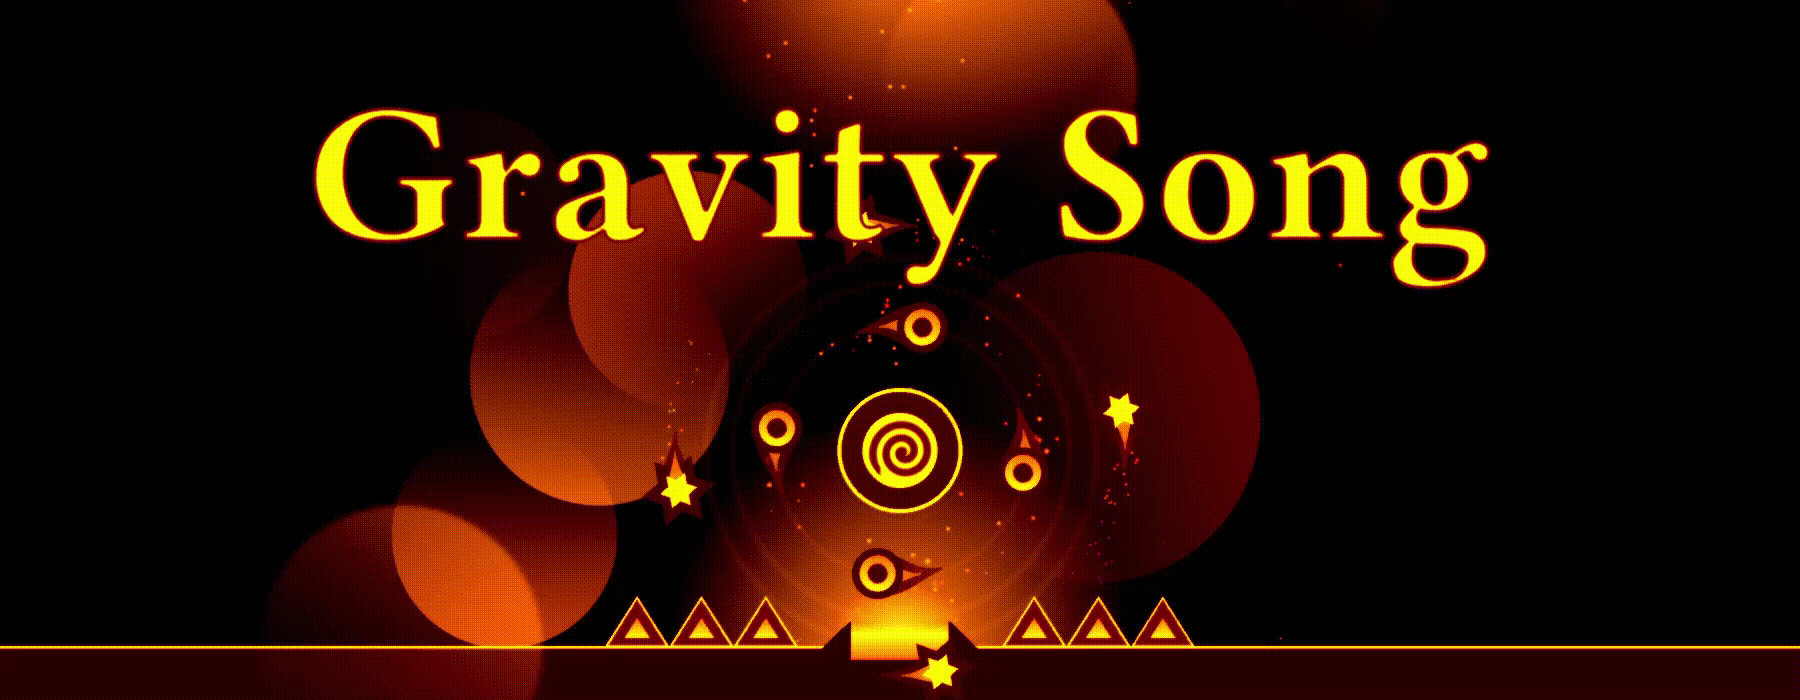 Gravity Song